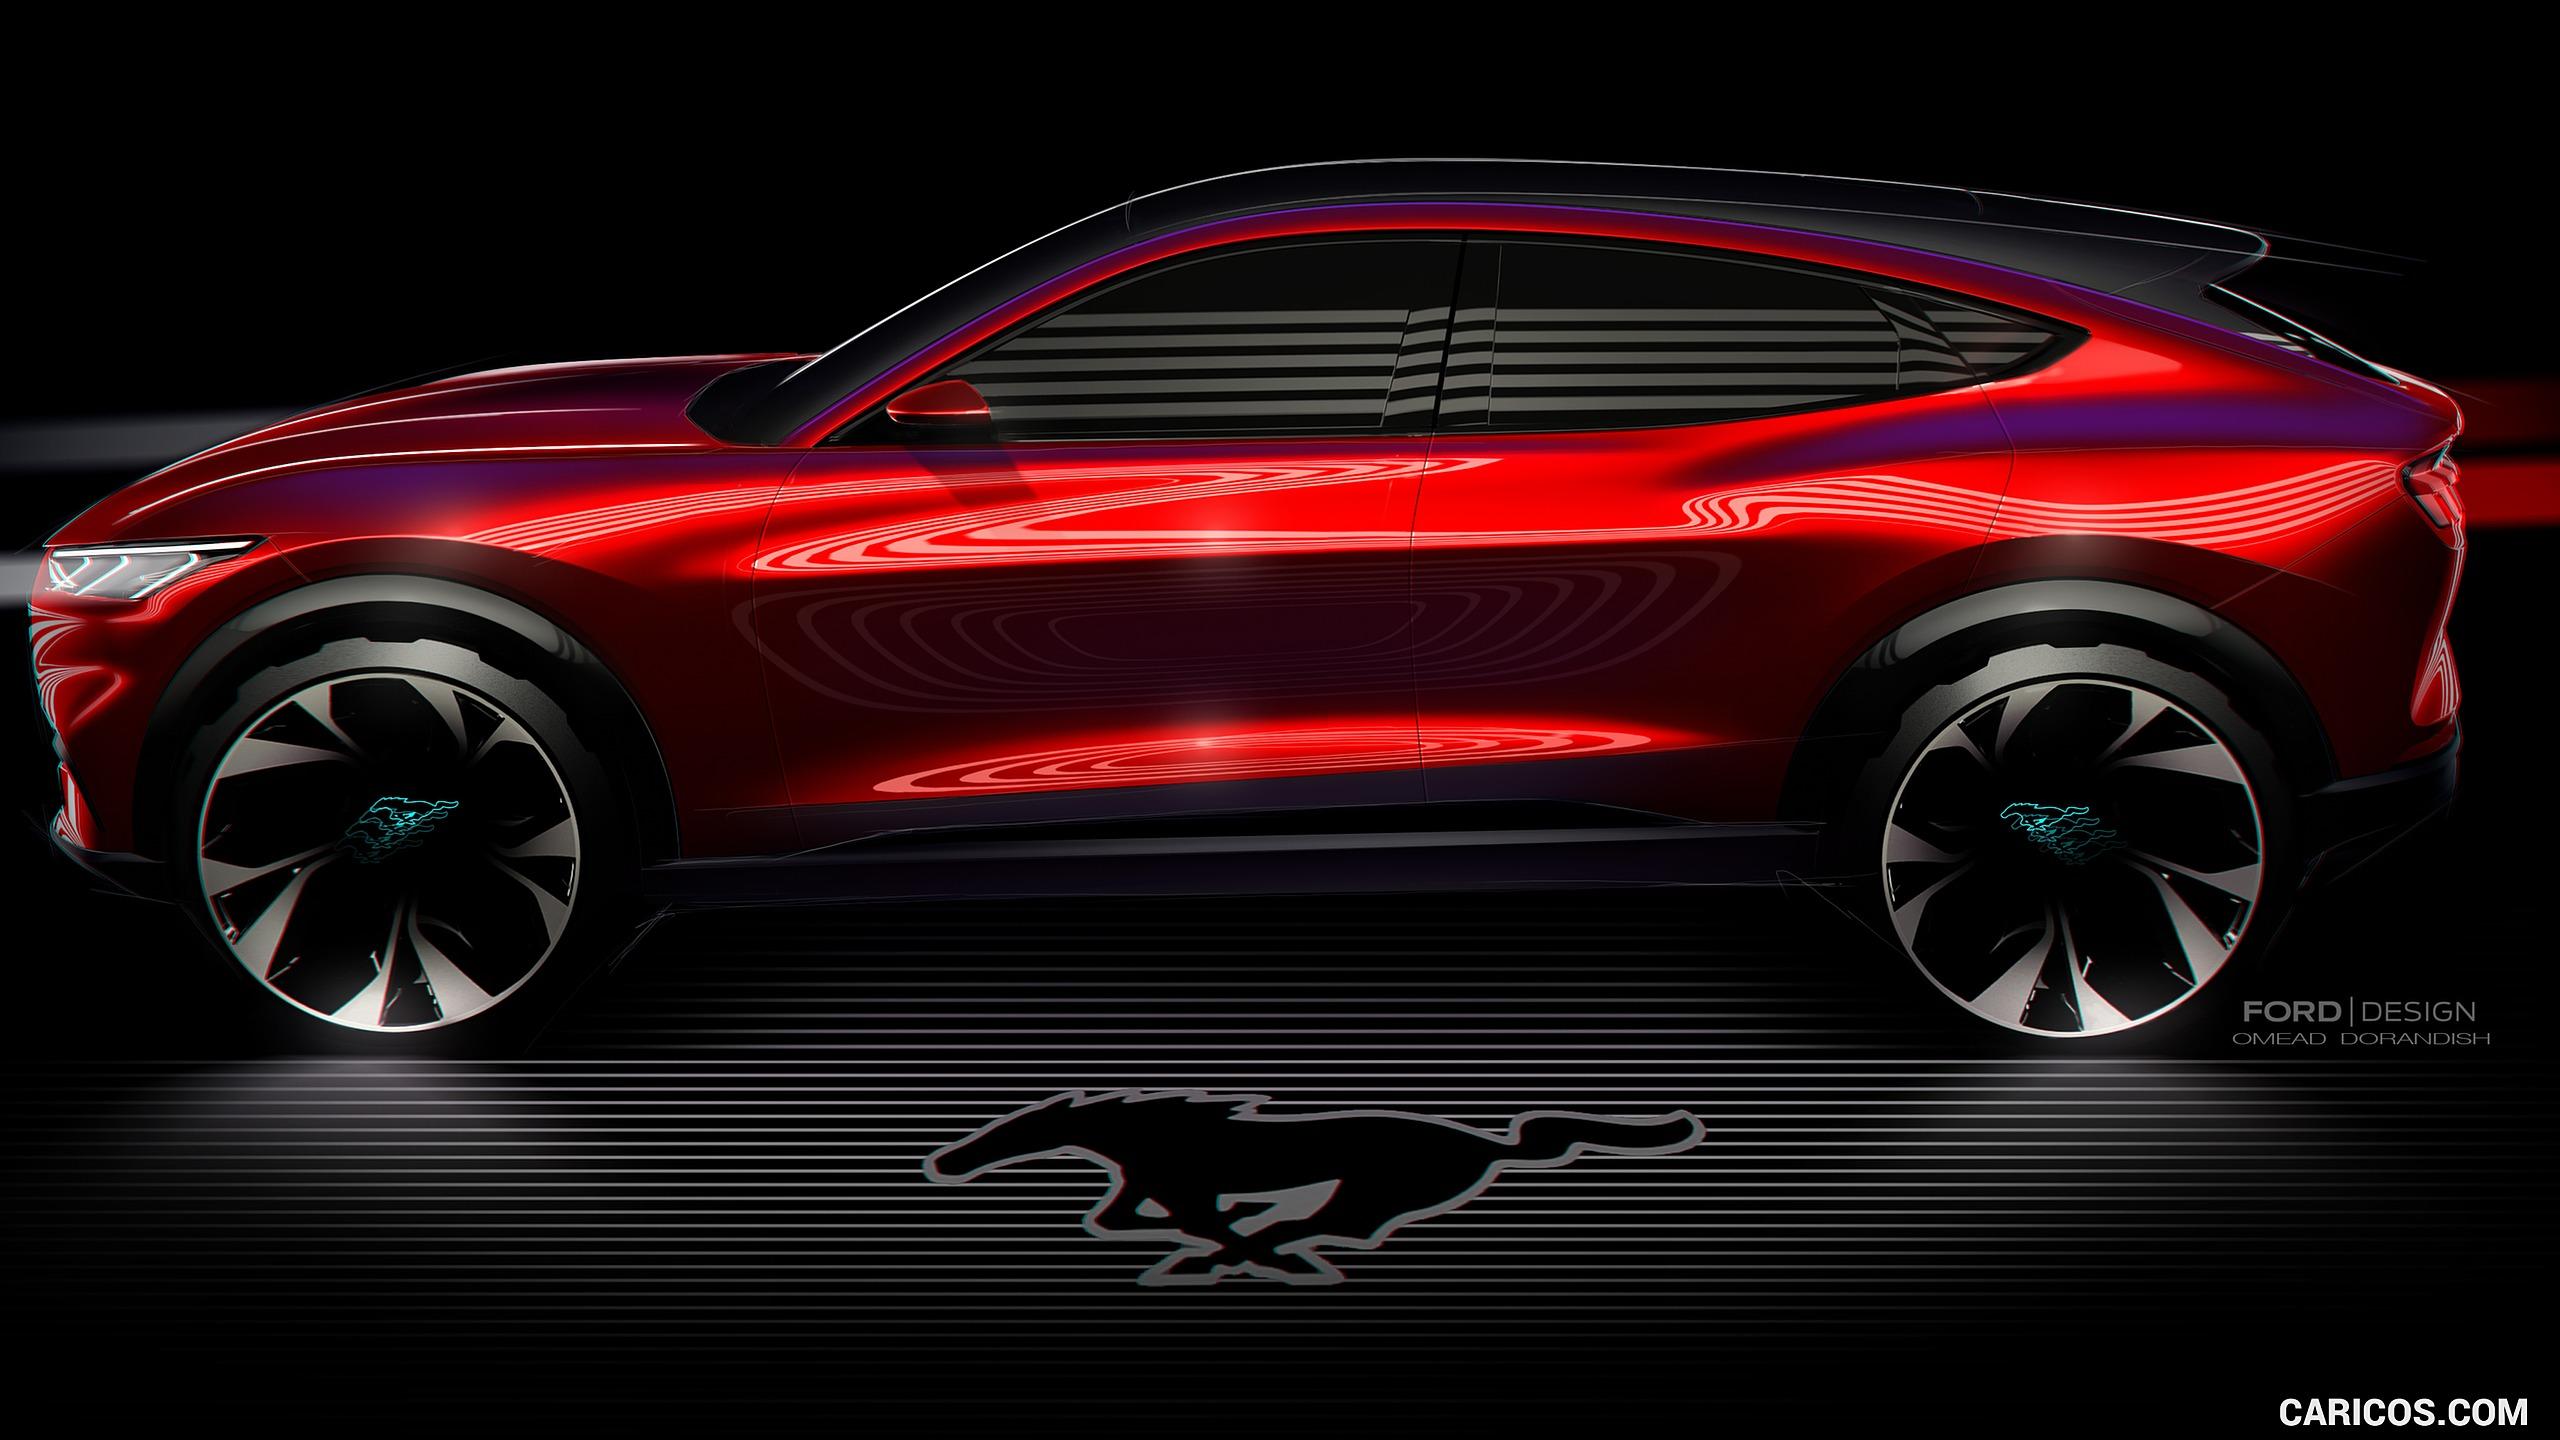 Ford Mustang Mach E Electric SUV Sketch. HD